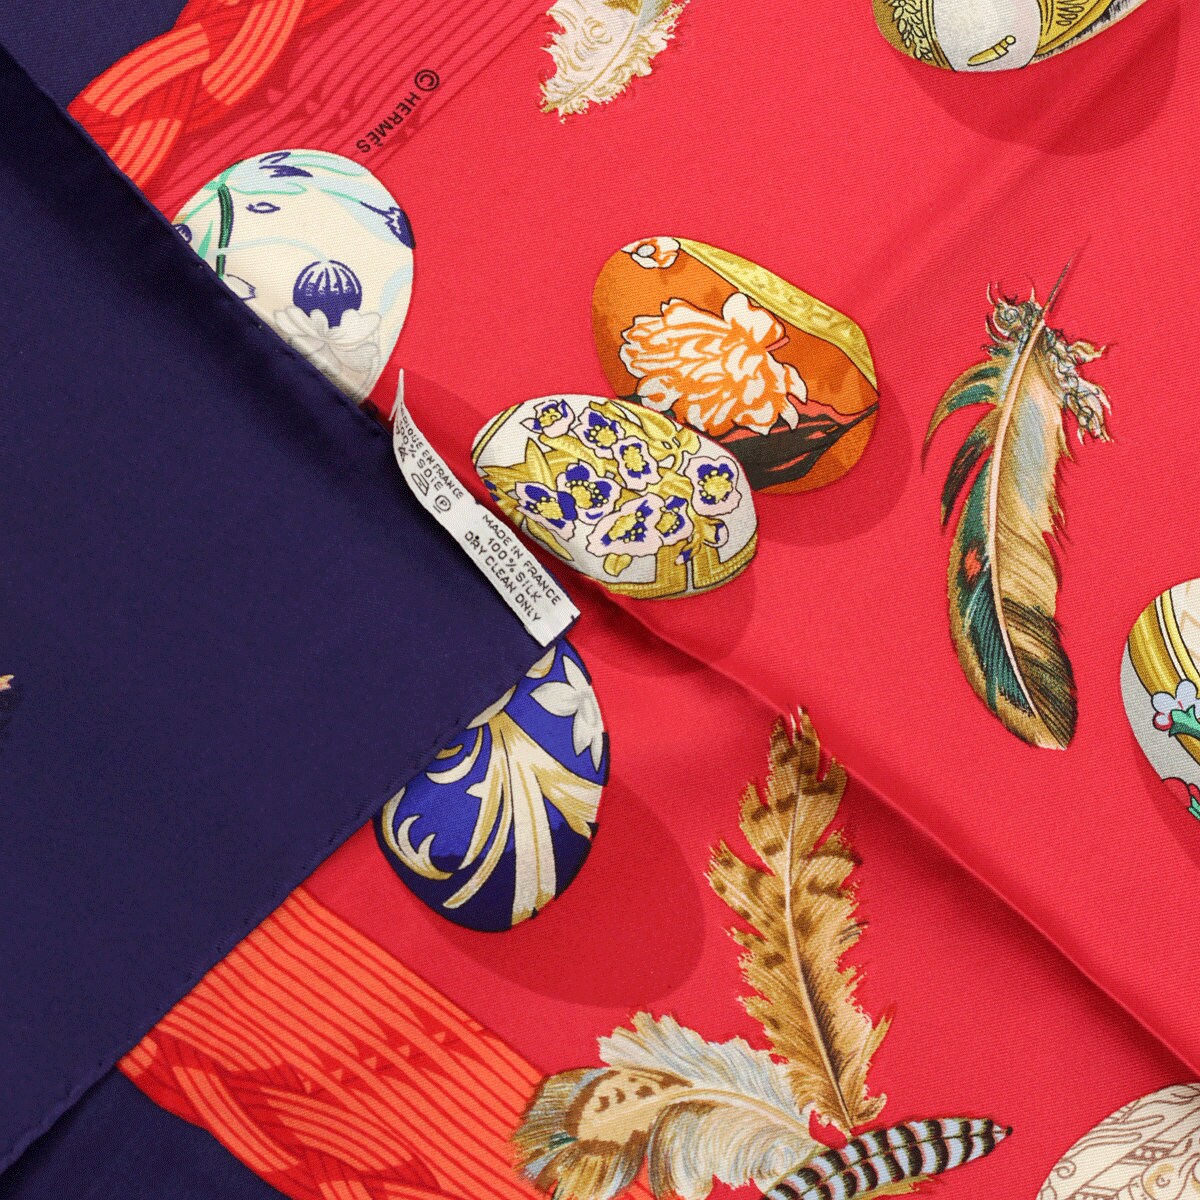 Hermes Scarf "Couvee d'Hermes" by Caty Latham 90cm Silk | Carre